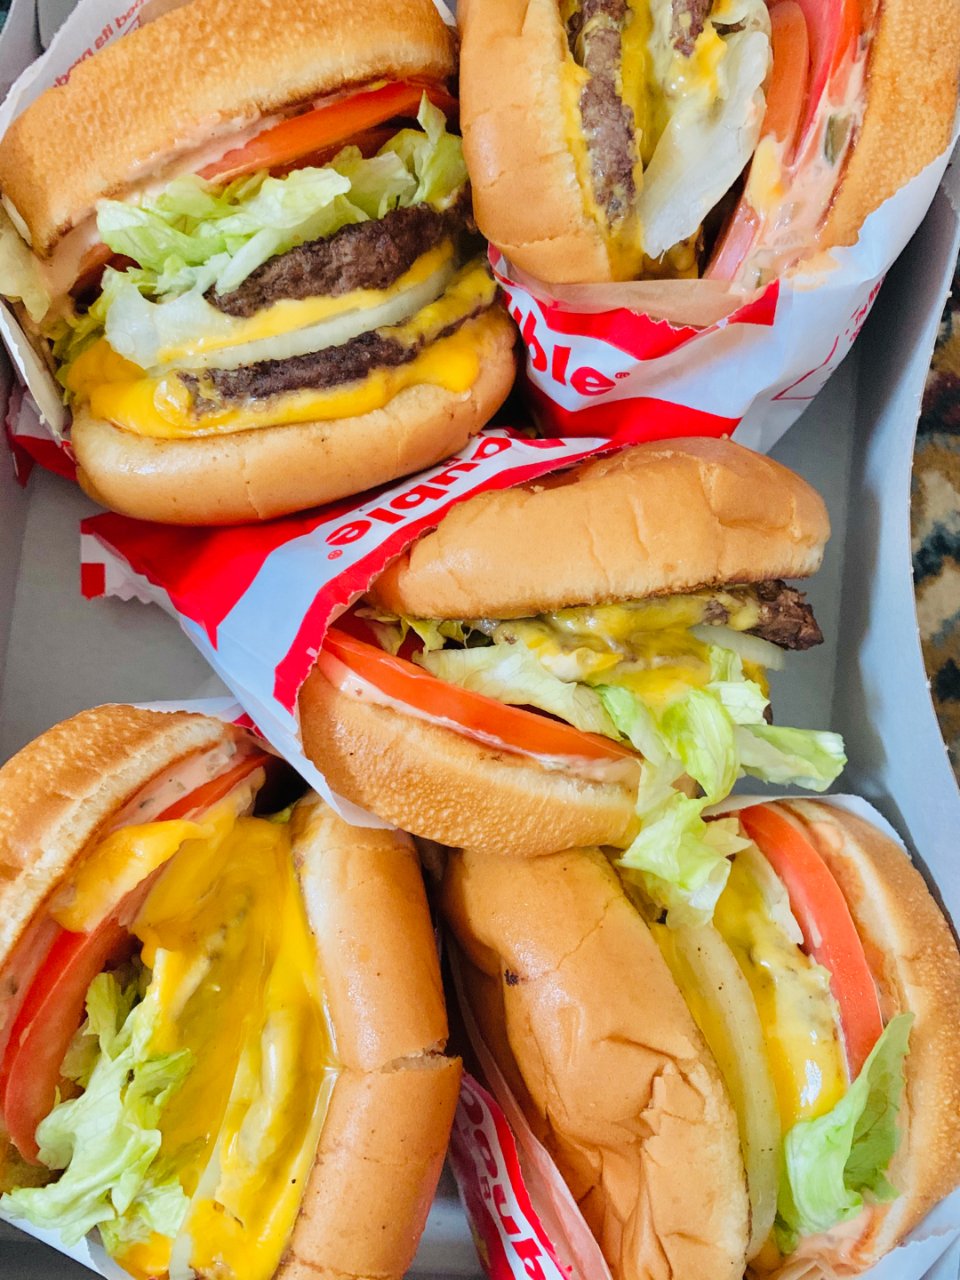 In-n-out,IN-N-OUT BURGER